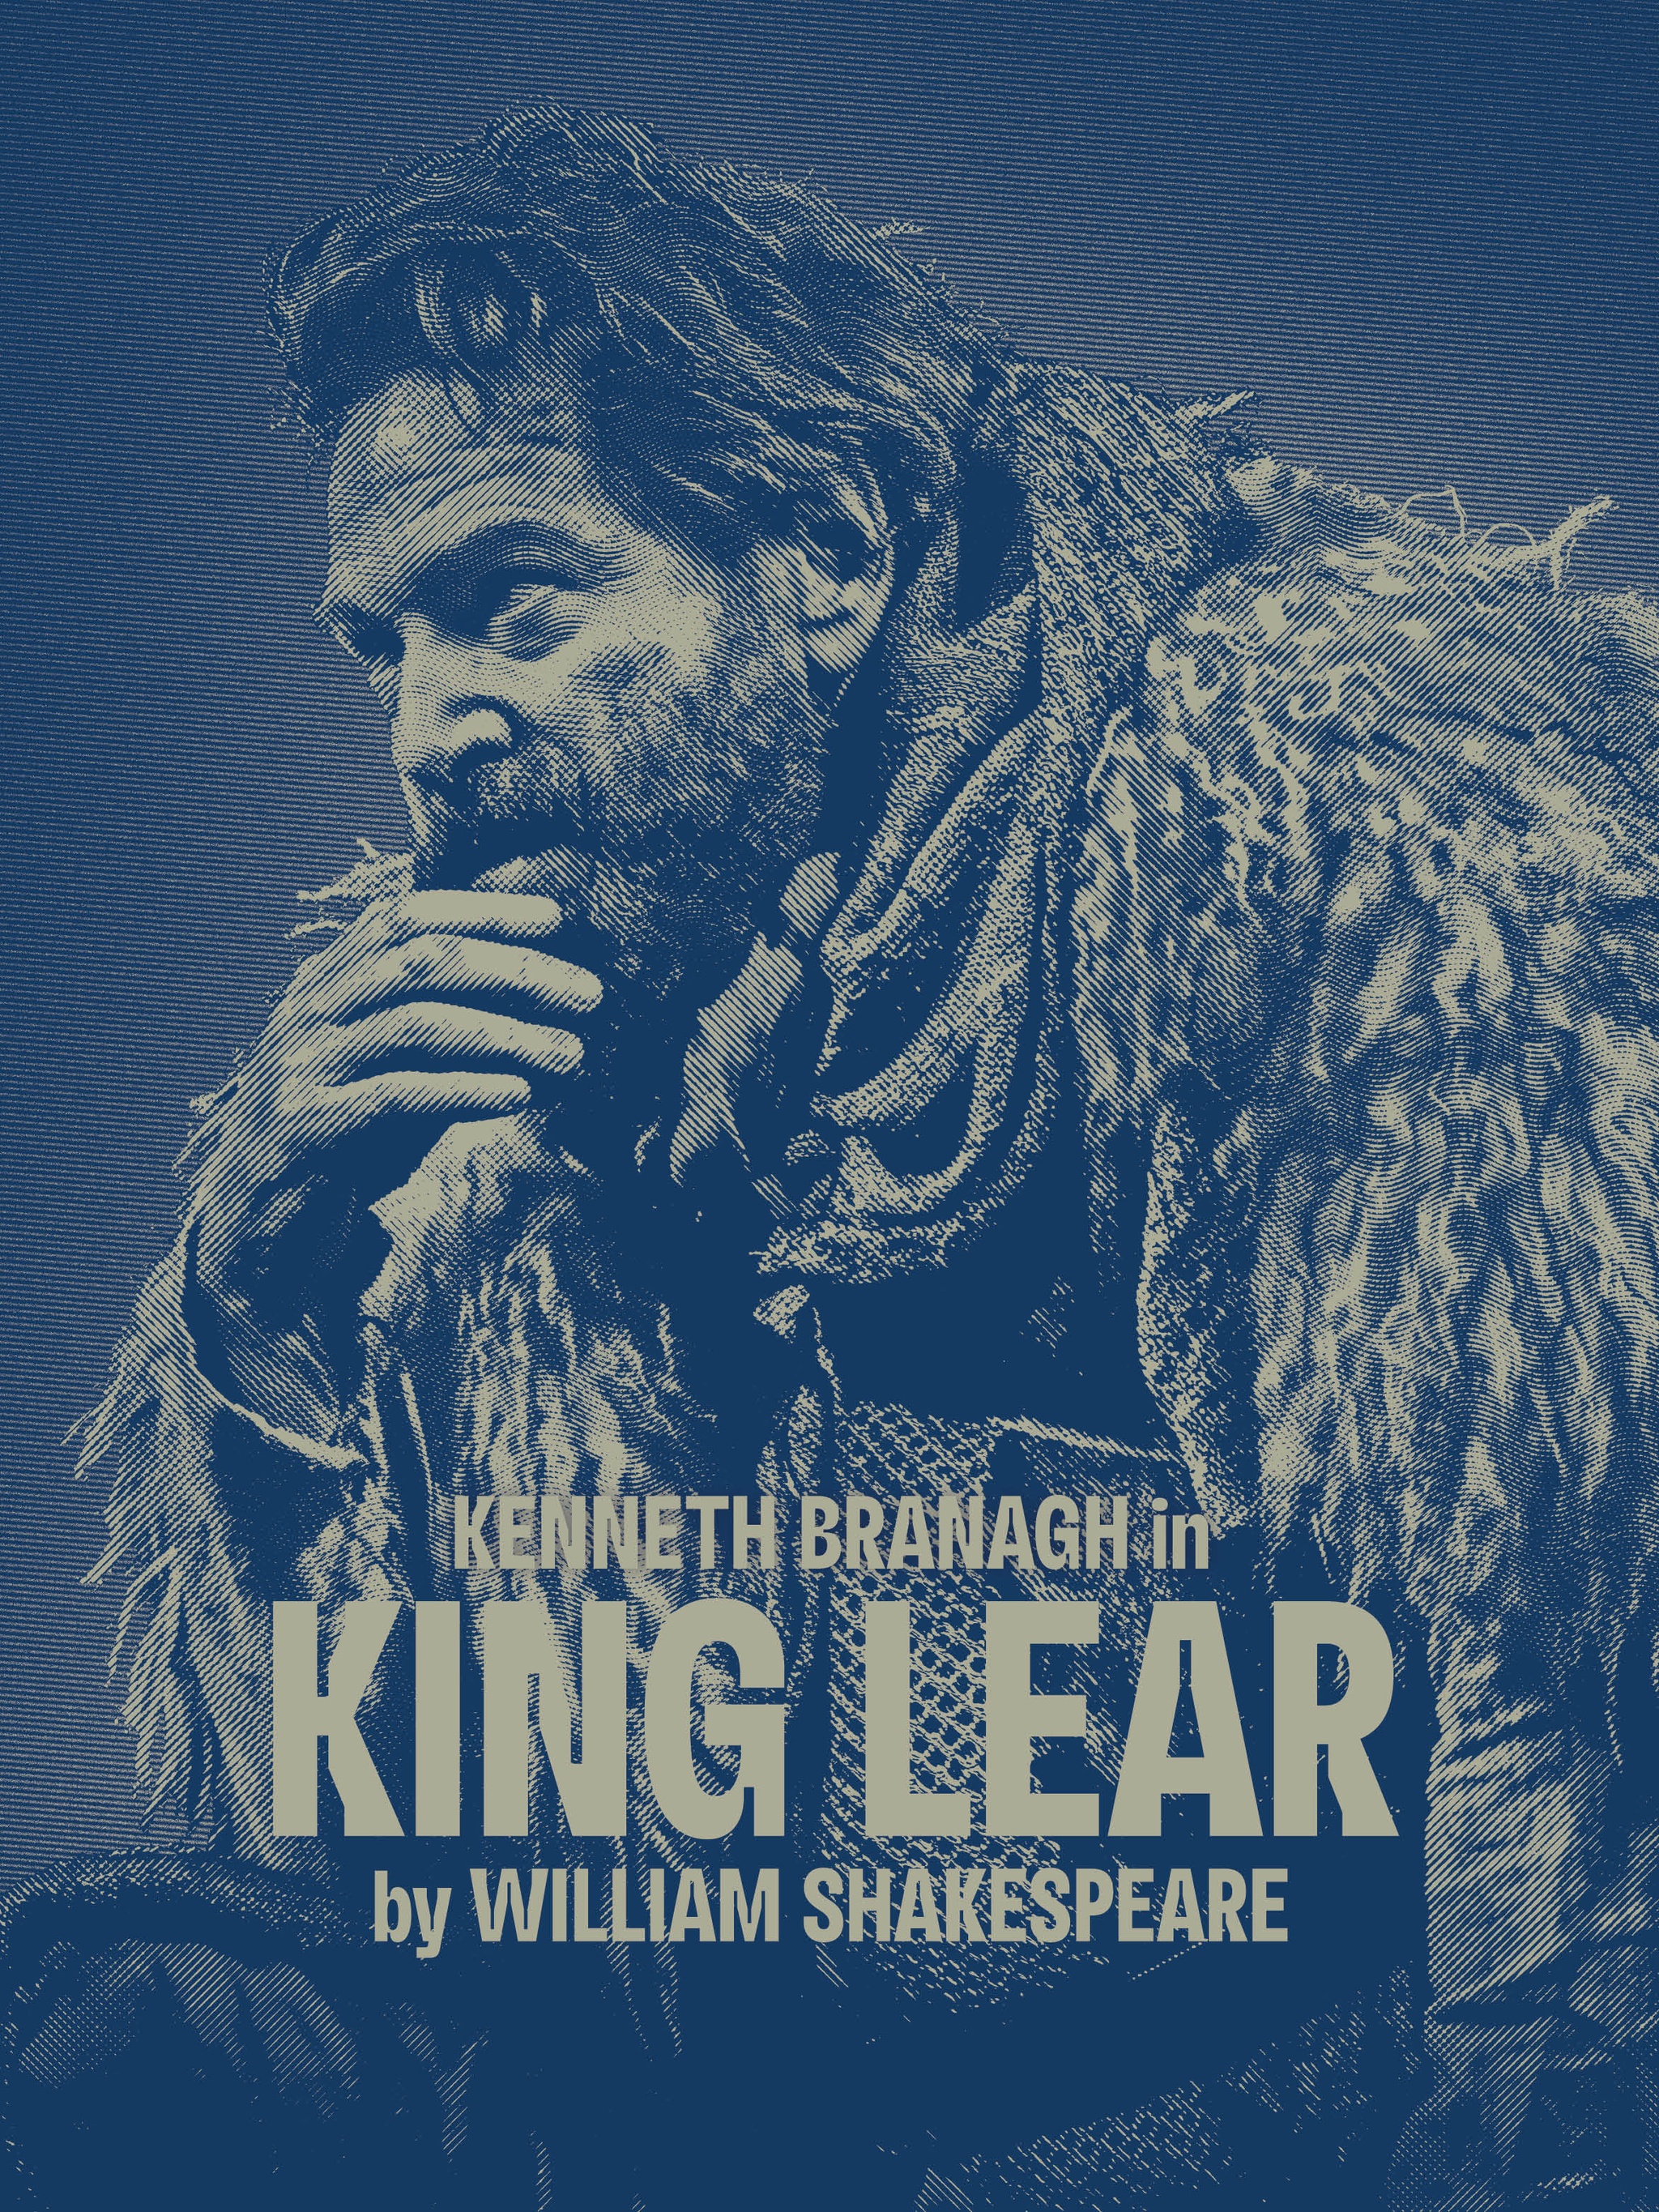 An illustration of Kenneth Branagh in the role of King Lear. He sits slightly hunched over with his hand to his mouth as if considering a question. The illustration is a blue rendering of a photo made to look like an etching from an antique book. Overlaid on the image is the show billing: Kenneth Branagh in King Lear by William Shakespeare.